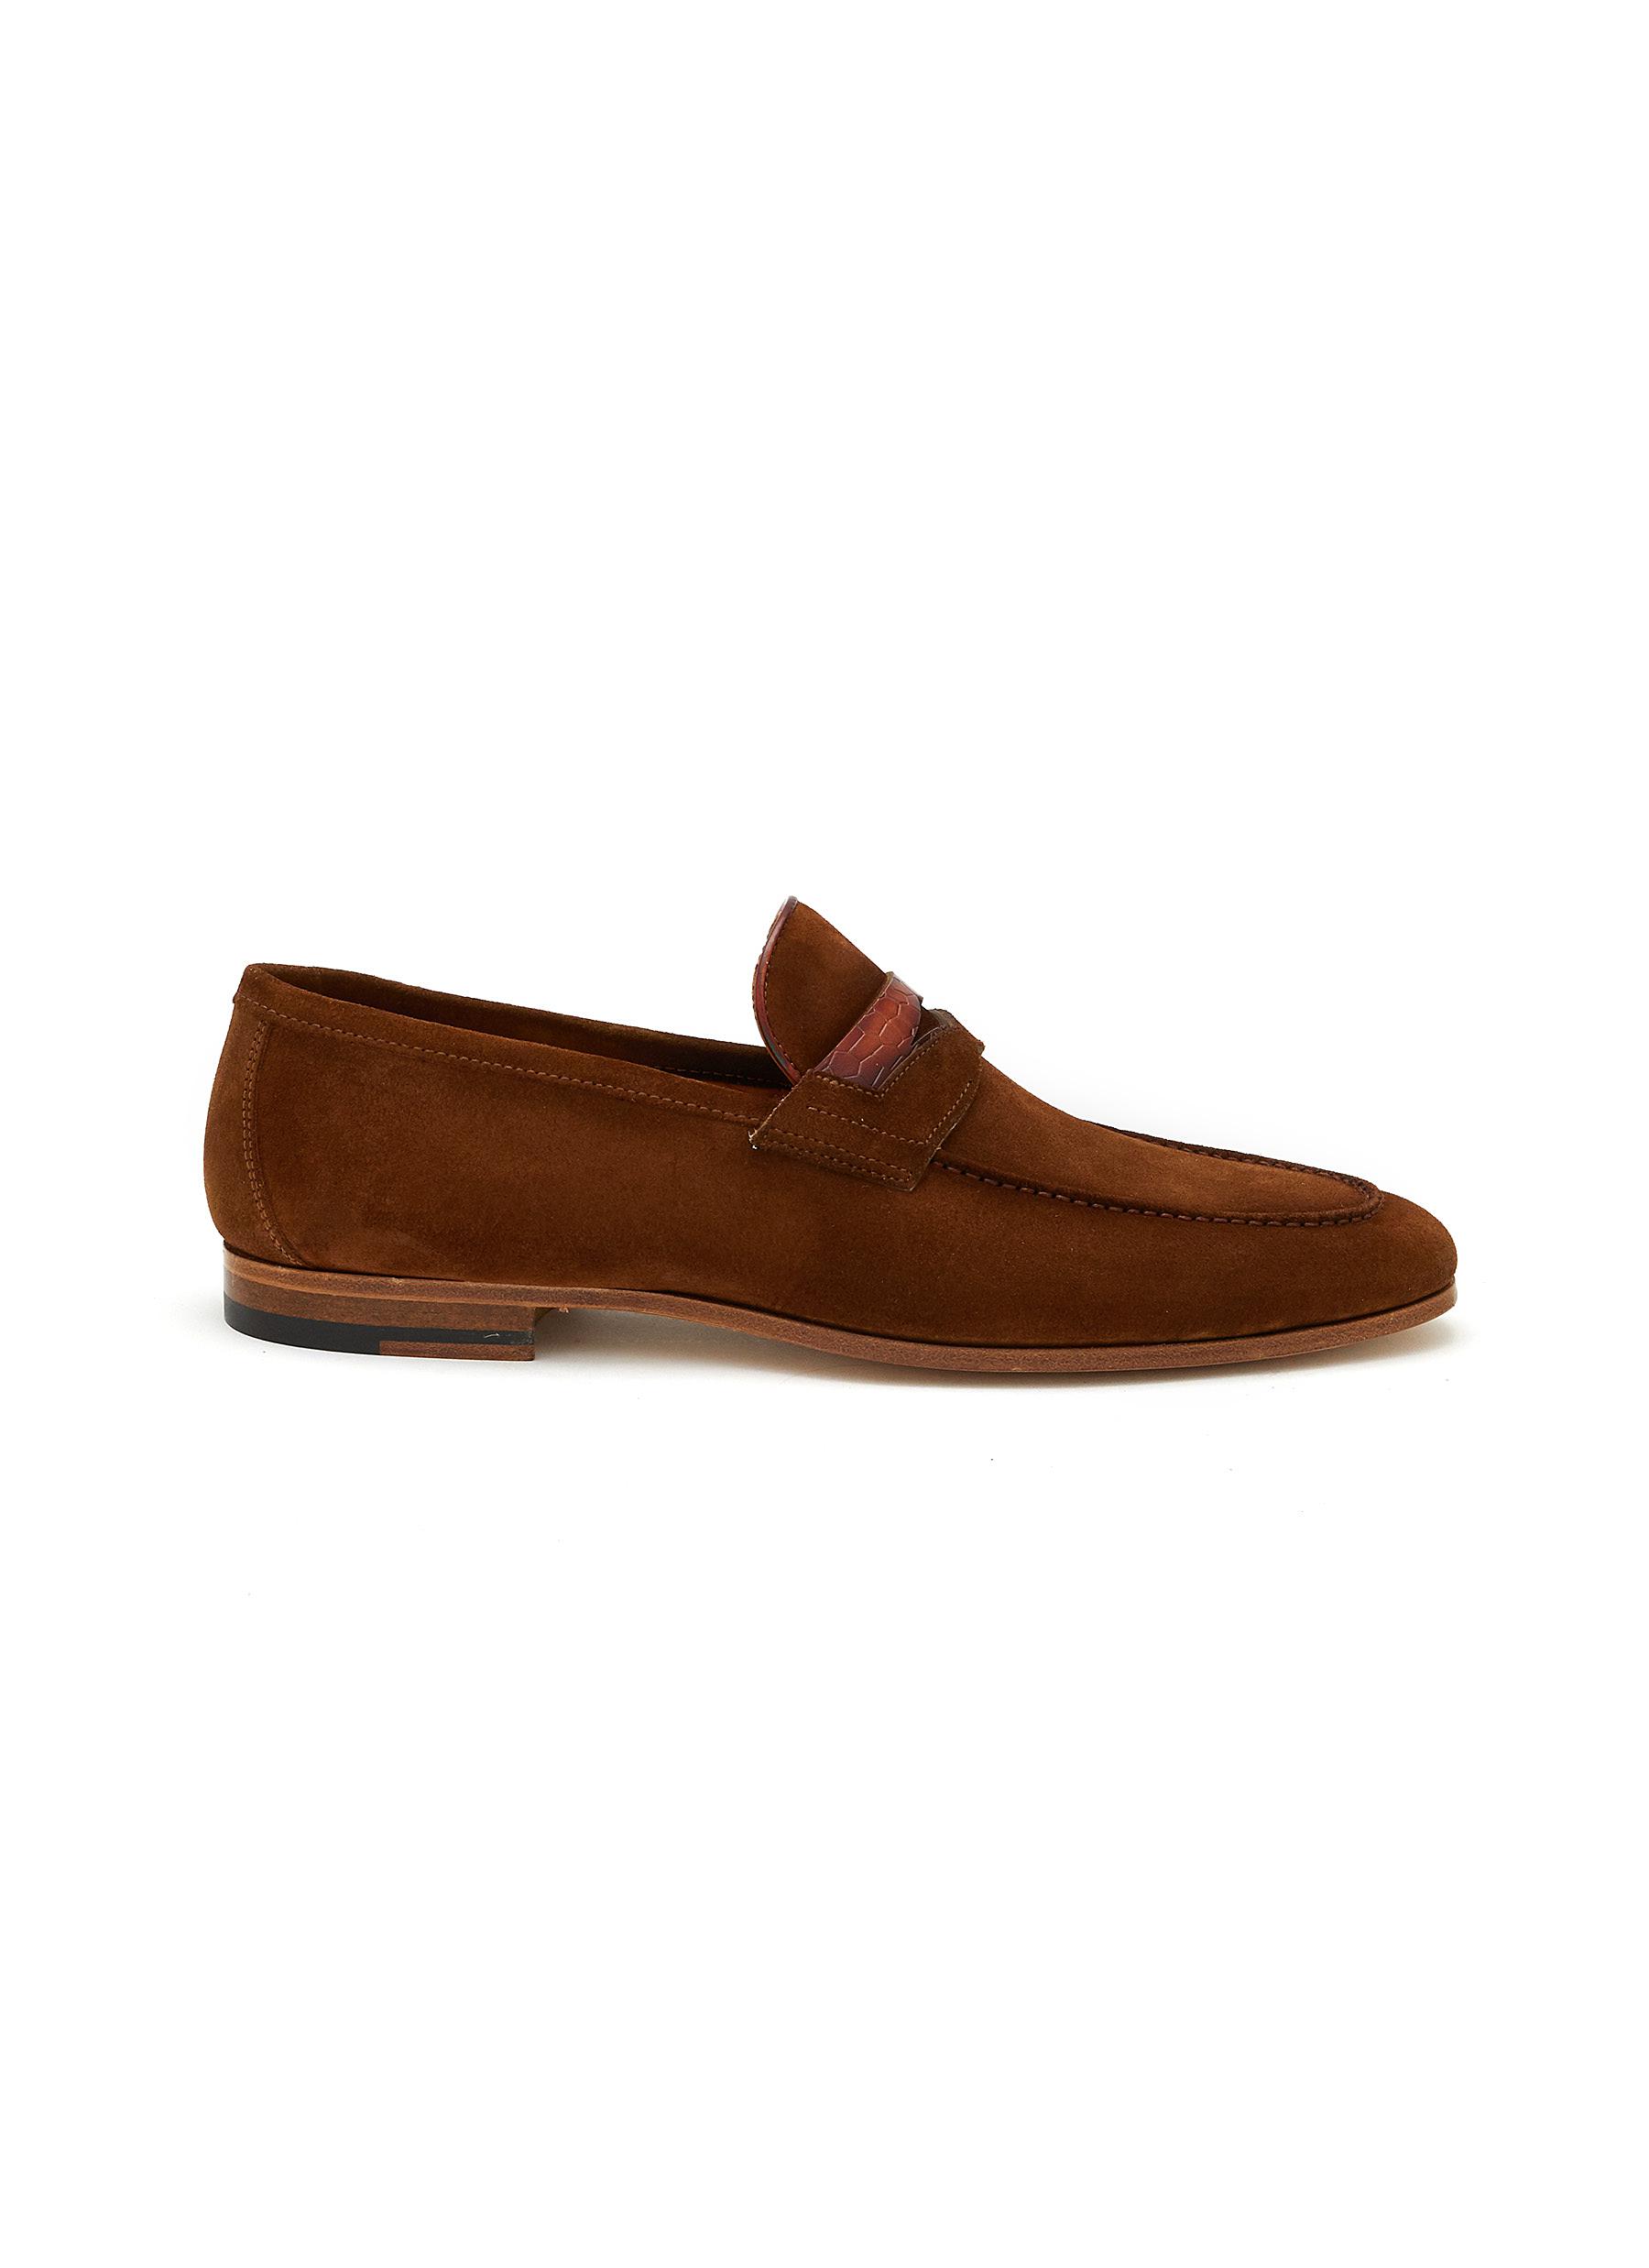 MAGNANNI ‘HENDIDOS' CROCODILE EMBOSSED STRAP SUEDE PENNY LOAFERS